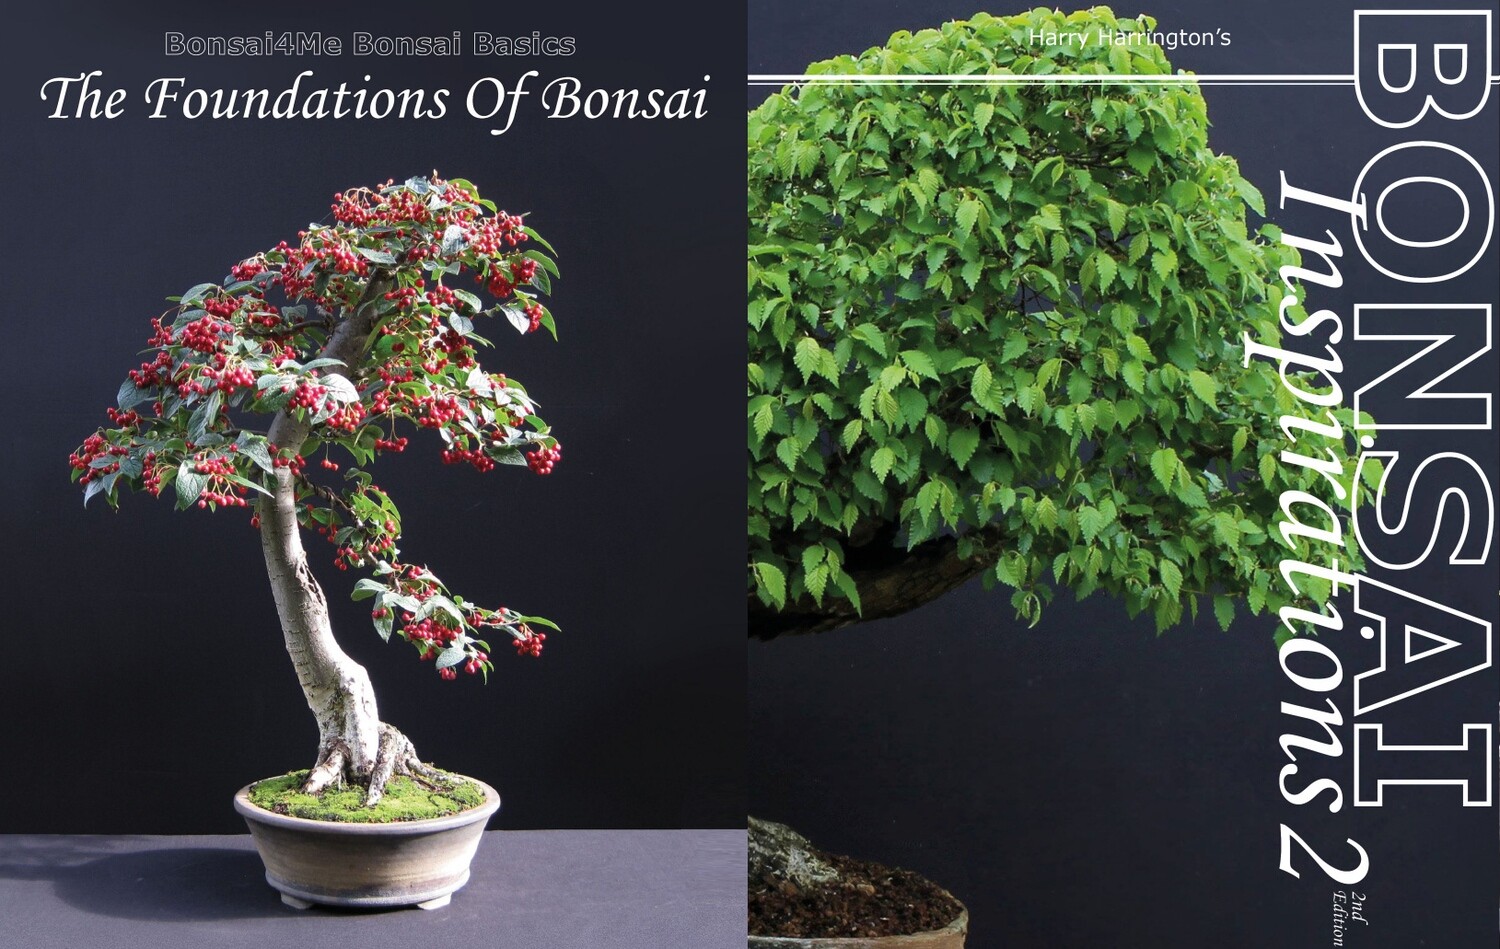 Foundations Of Bonsai and Bonsai Inspirations 2 combined. 15% discount